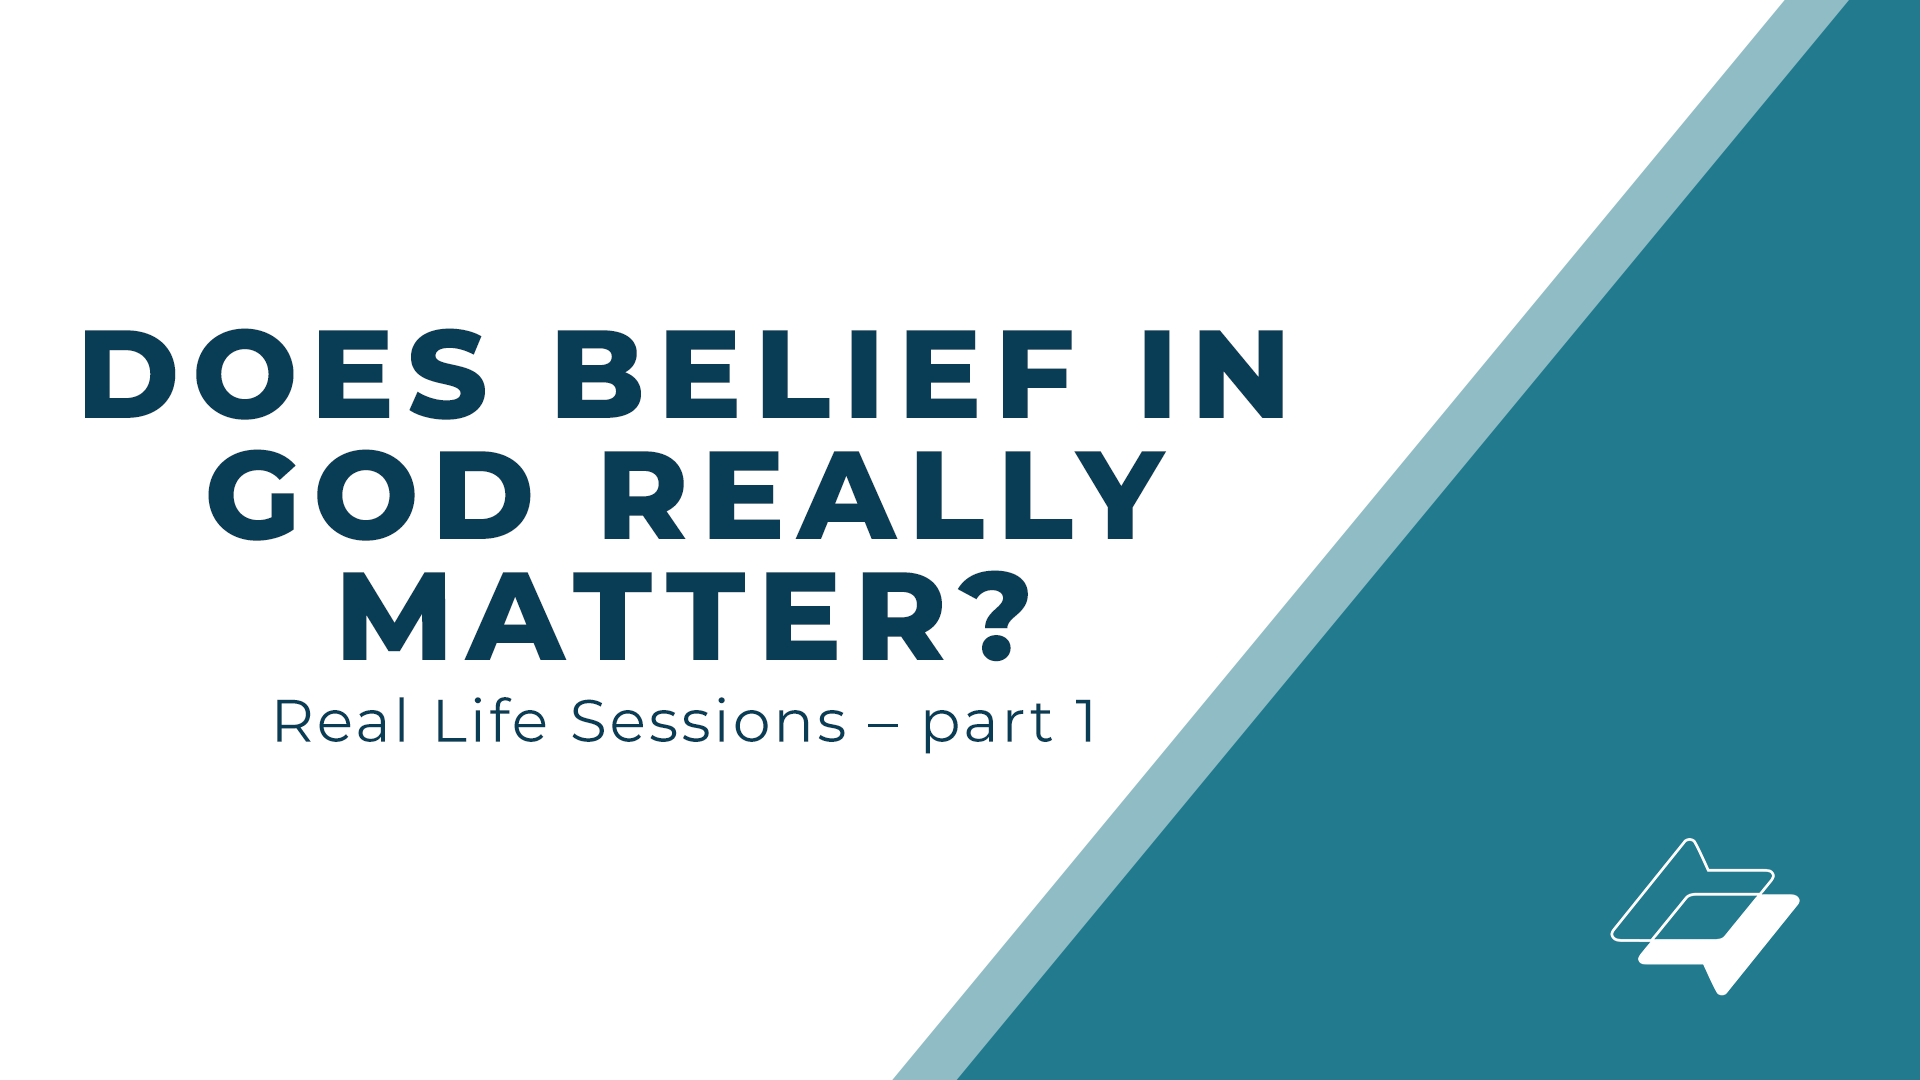 Does belief in God really matter? – Real Life Sessions – Part 1